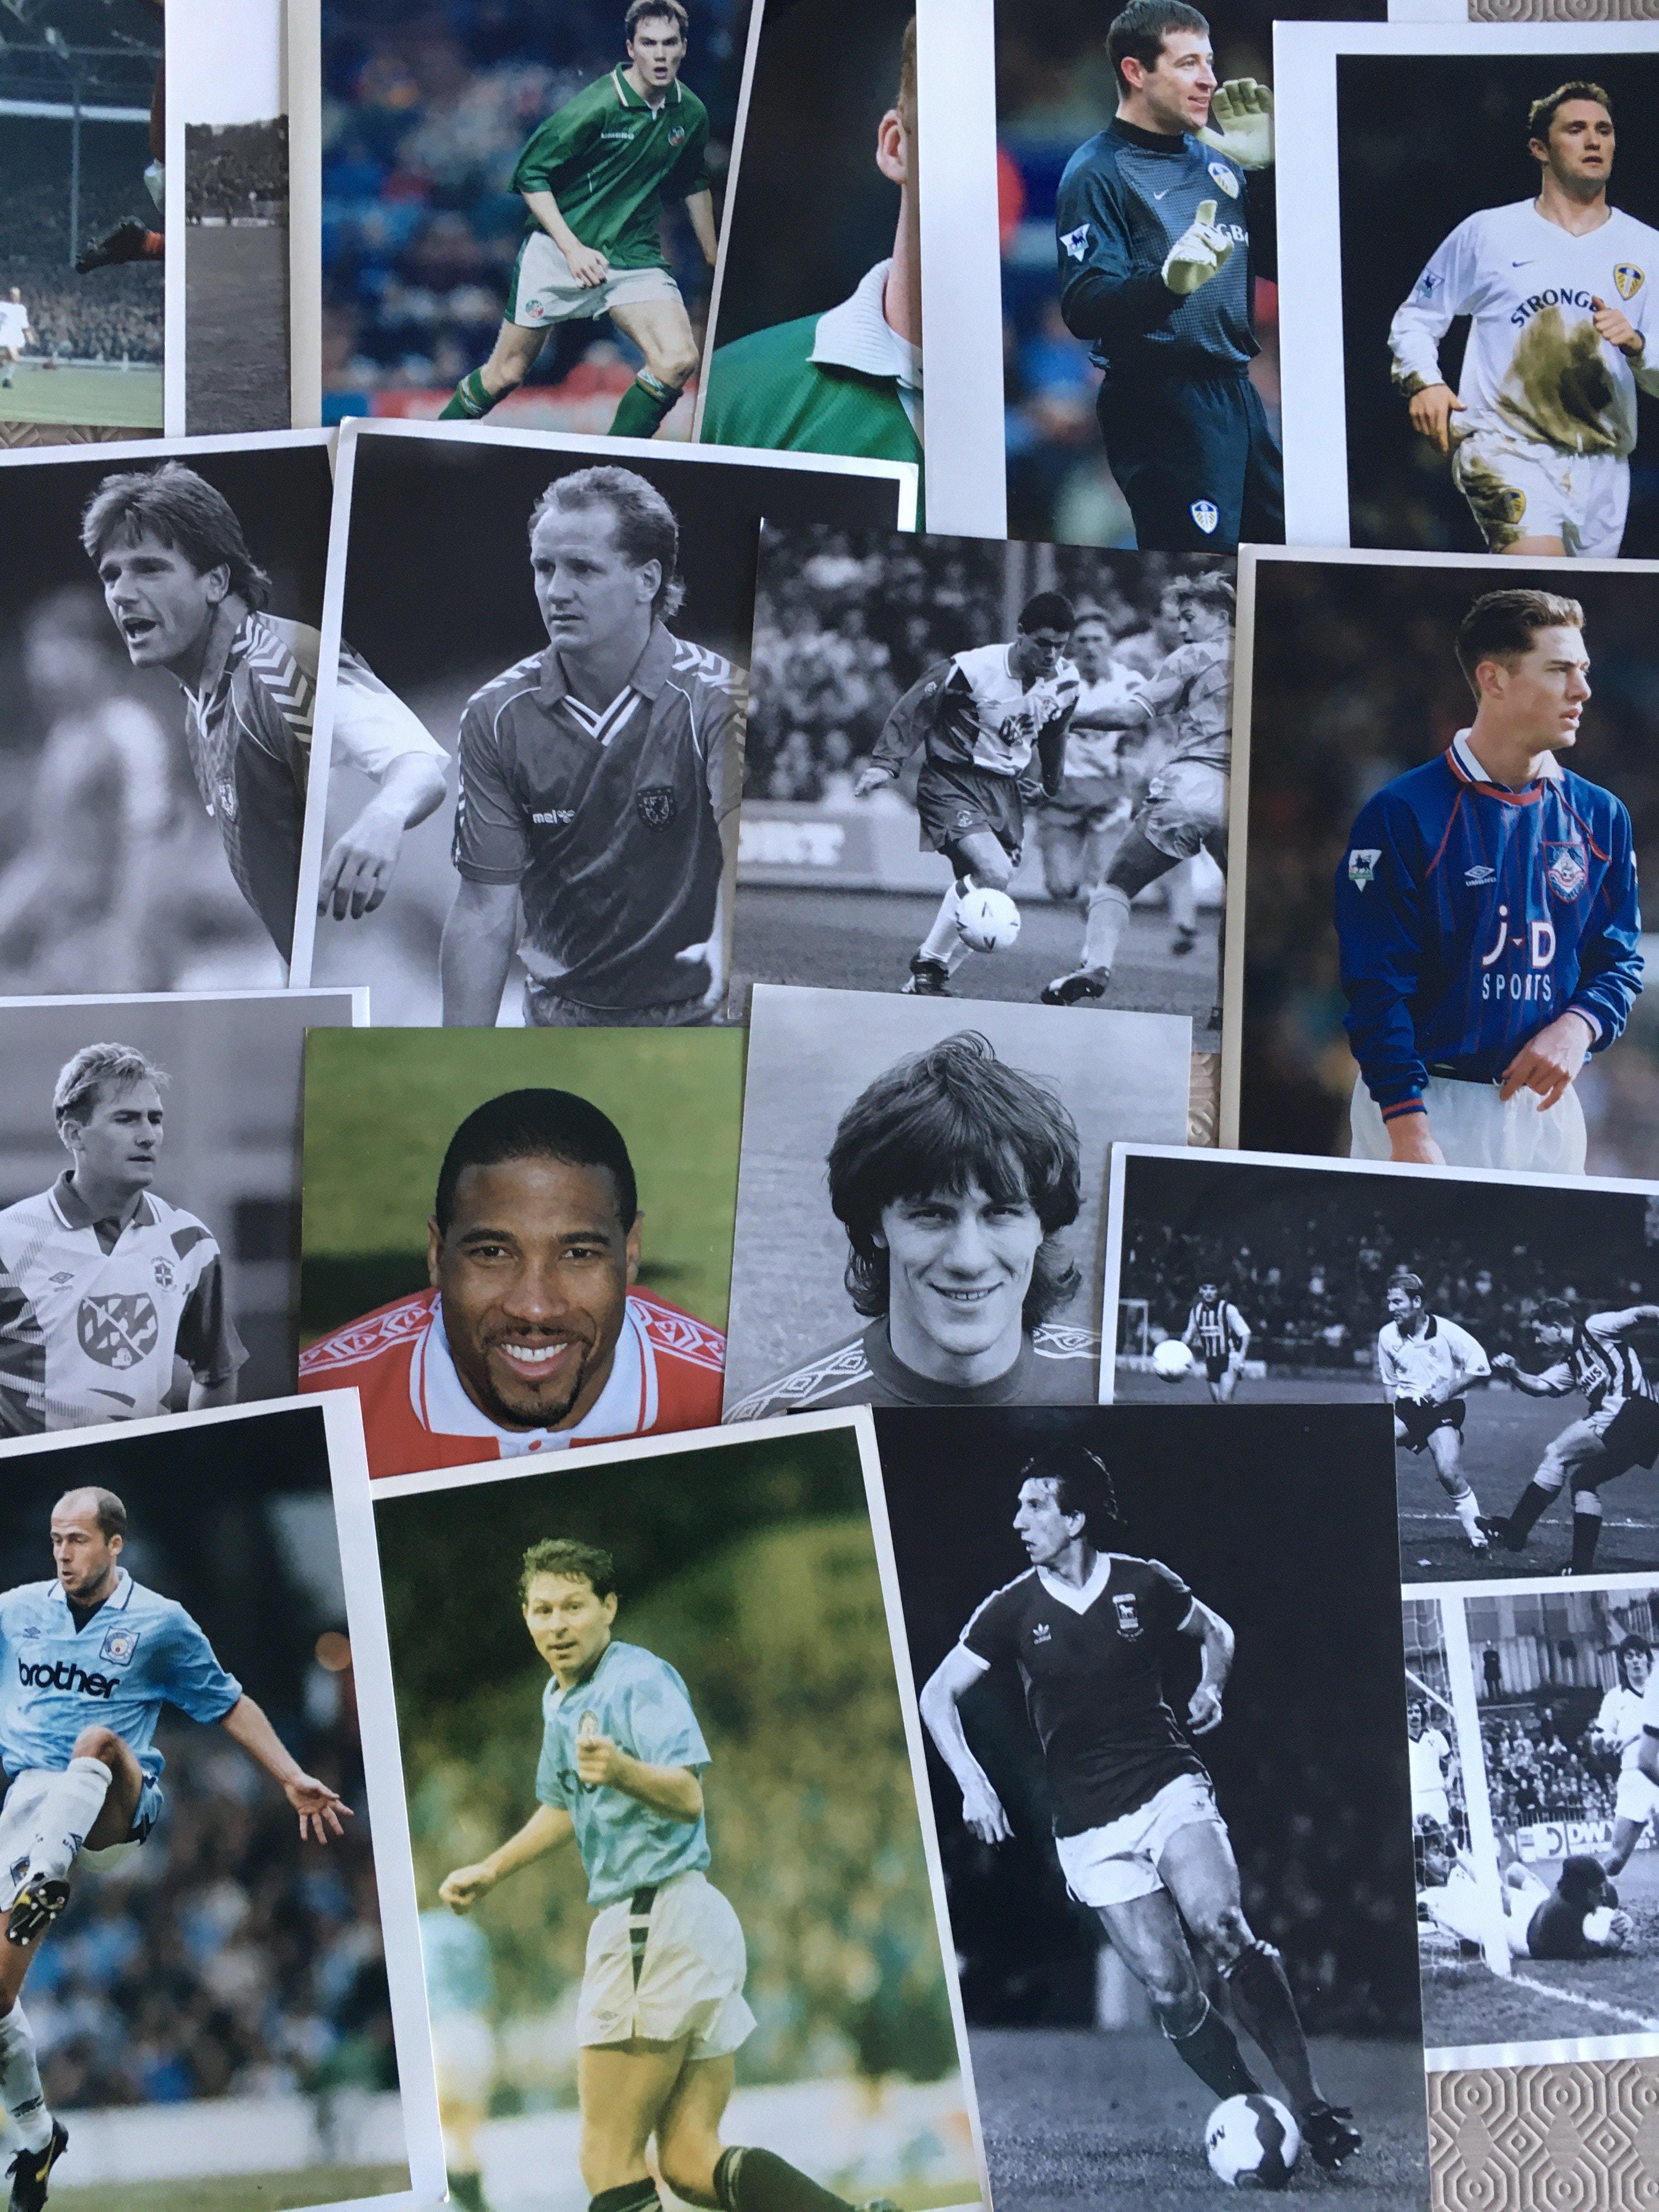 Football Press Photos Collection: From the 80s and 90s with a lot being individual players. Colour